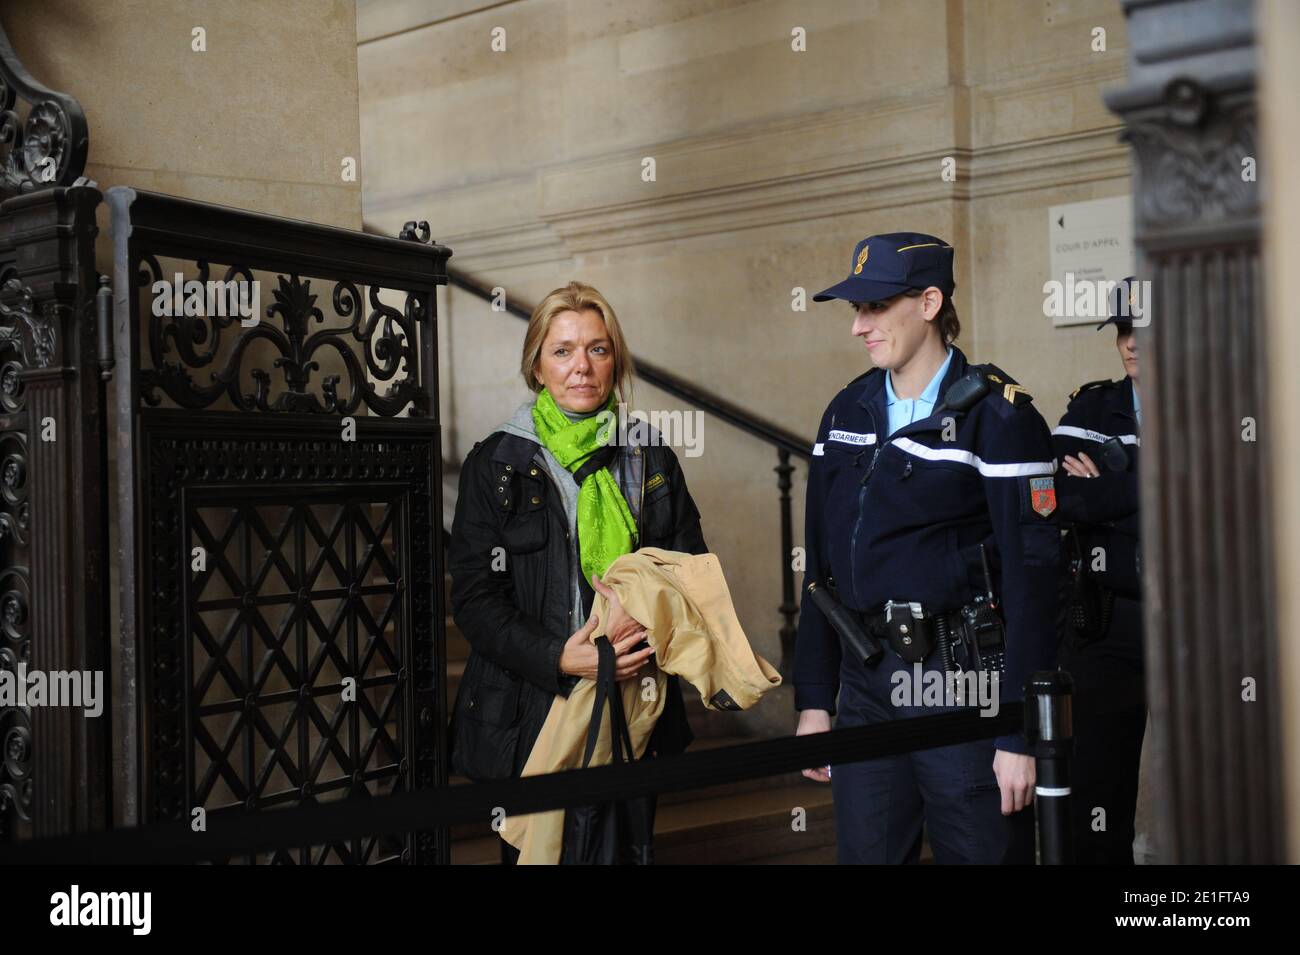 Diana Gunther (L), the daughter of German cardiologist Dieter Krombach at the Palais de Justice where she attended the second day of her father's trial for the murder of Kalinka Bamberski, in Paris, France on March 30, 2011. The French court today decided to continue the trial of the German doctor, who is accused of having raped and killed his then 14-year-old stepdaughter, Kalinka Bamberski, in the summer of 1982 while she was holidaying with her mother at Krombach's home at Lake Constance, southern Germany. A court in Germany ruled that Krombach could not be held responsible for the death, b Stock Photo